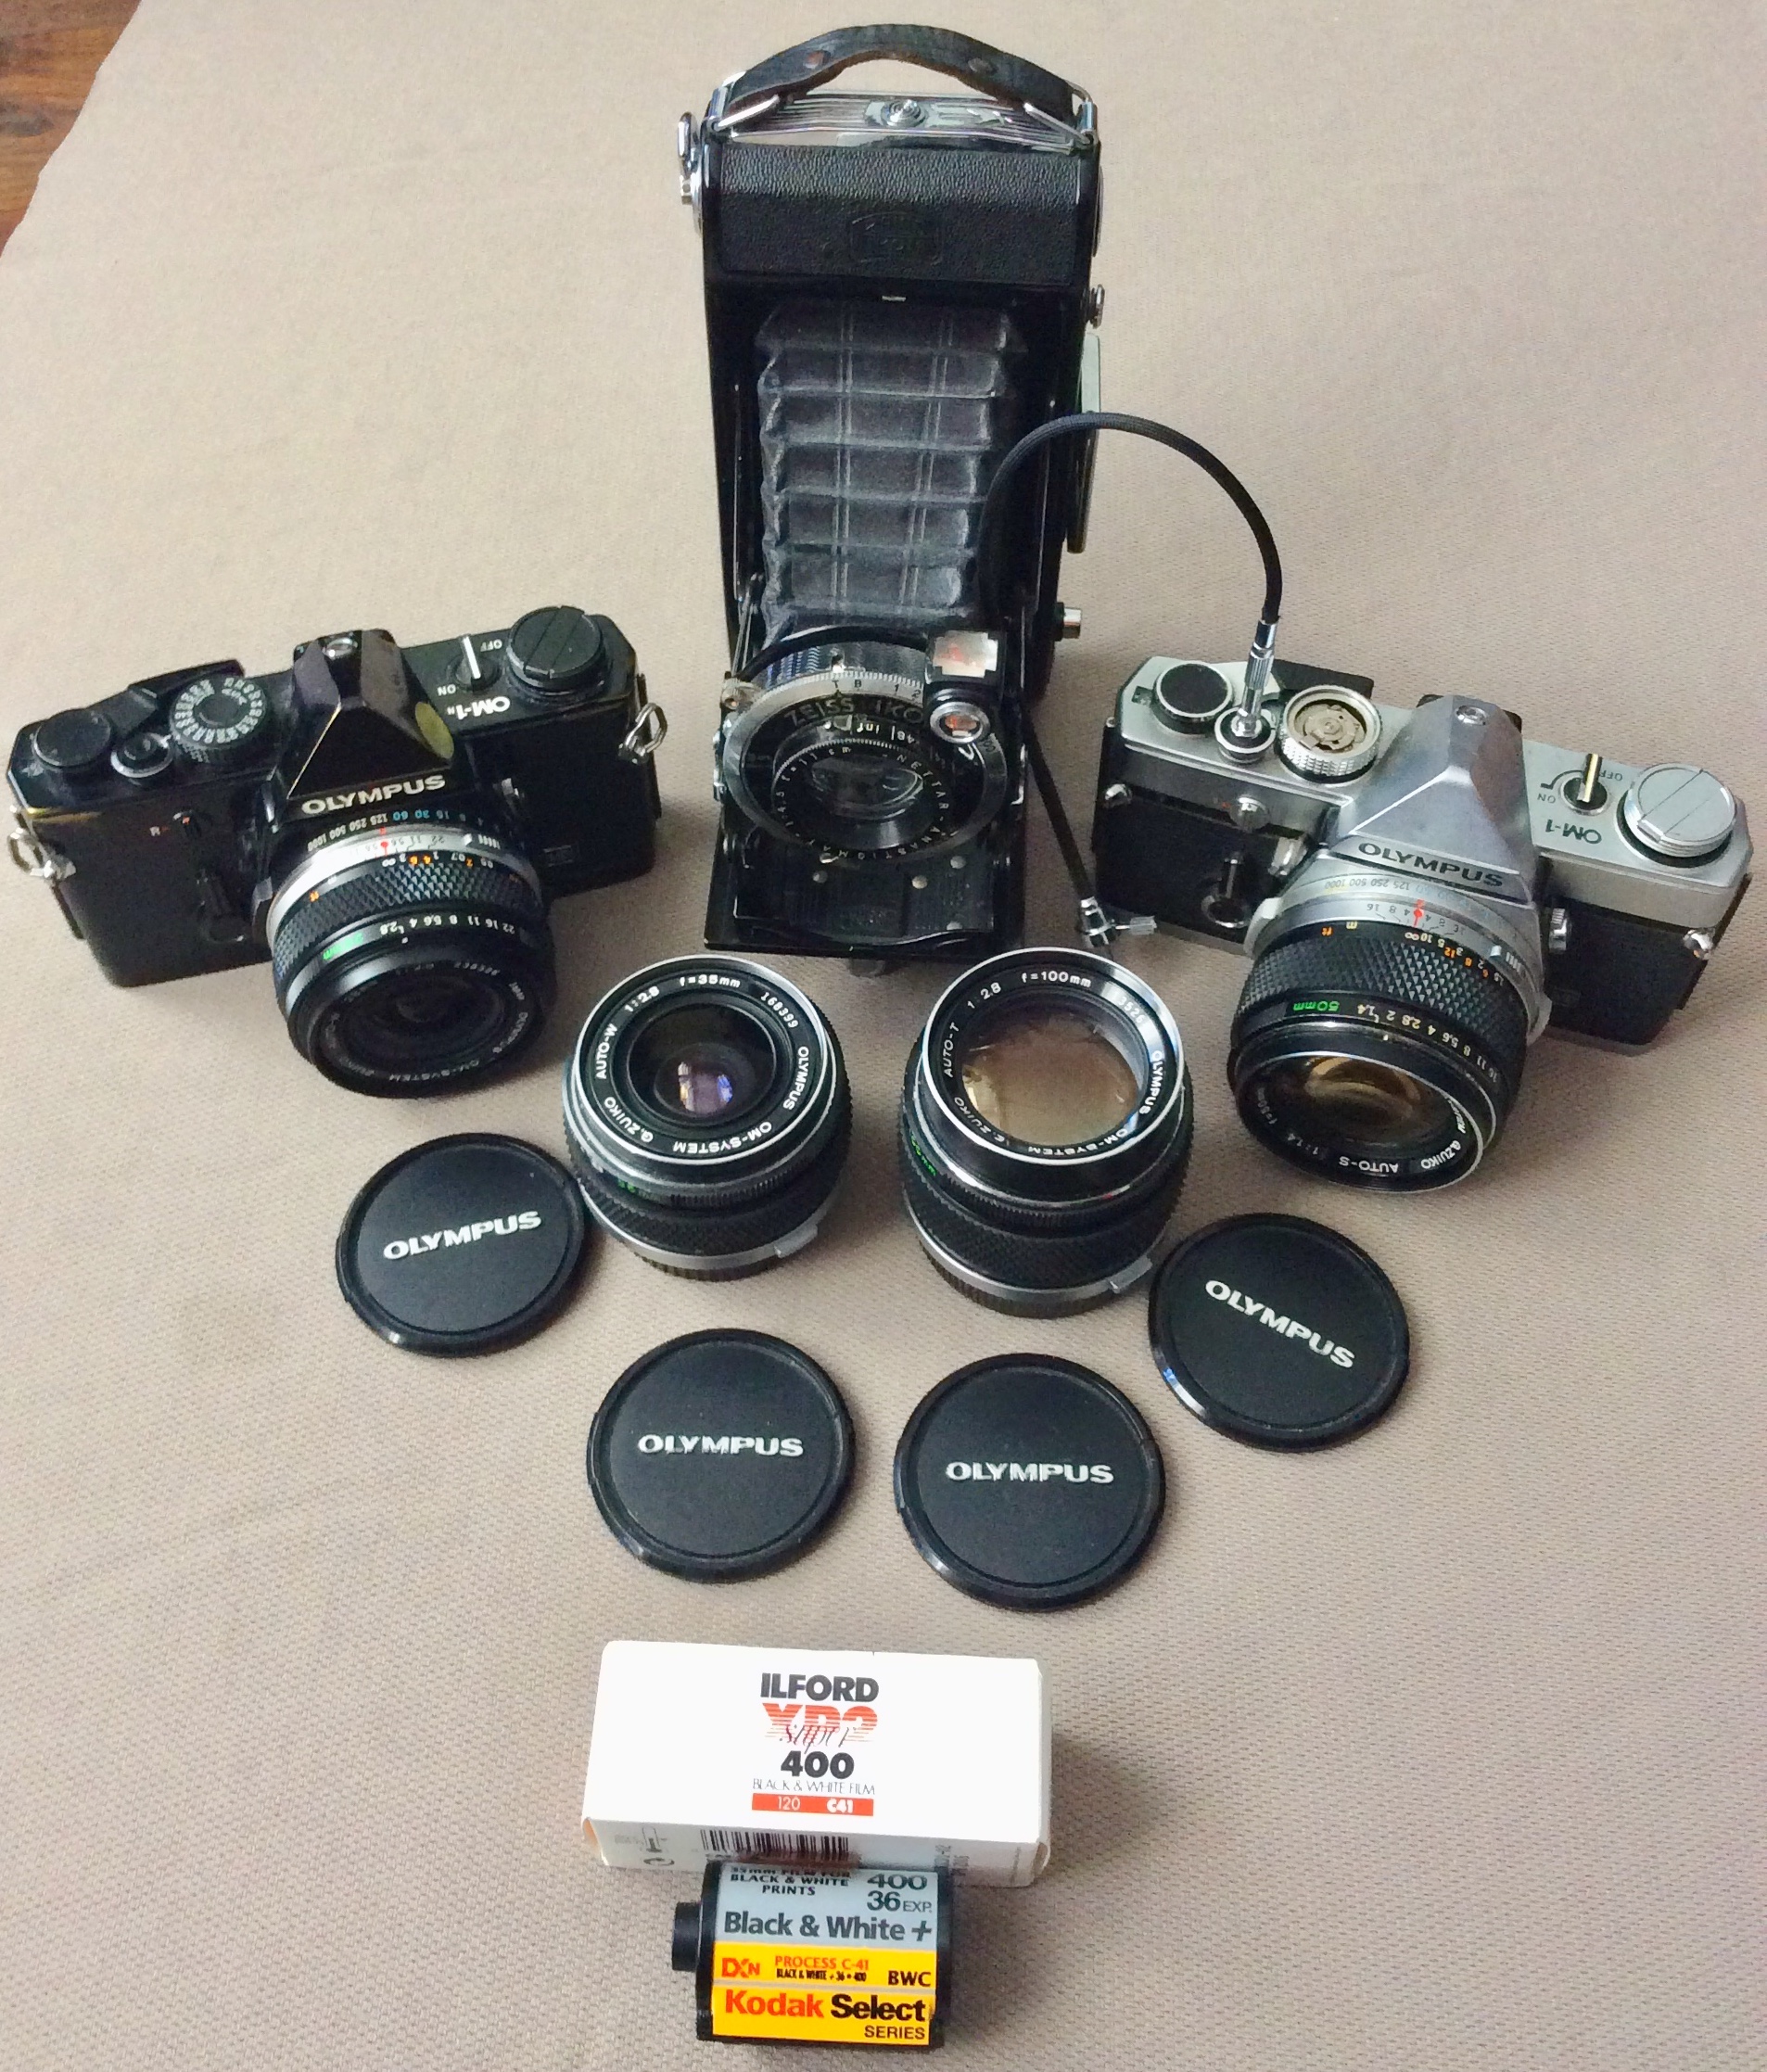 Olympus Om1 And Om1n Look Like Winning The Slr Contest Joined By A Zeiss Ikon Folder For 6 9 Grumpytykepix